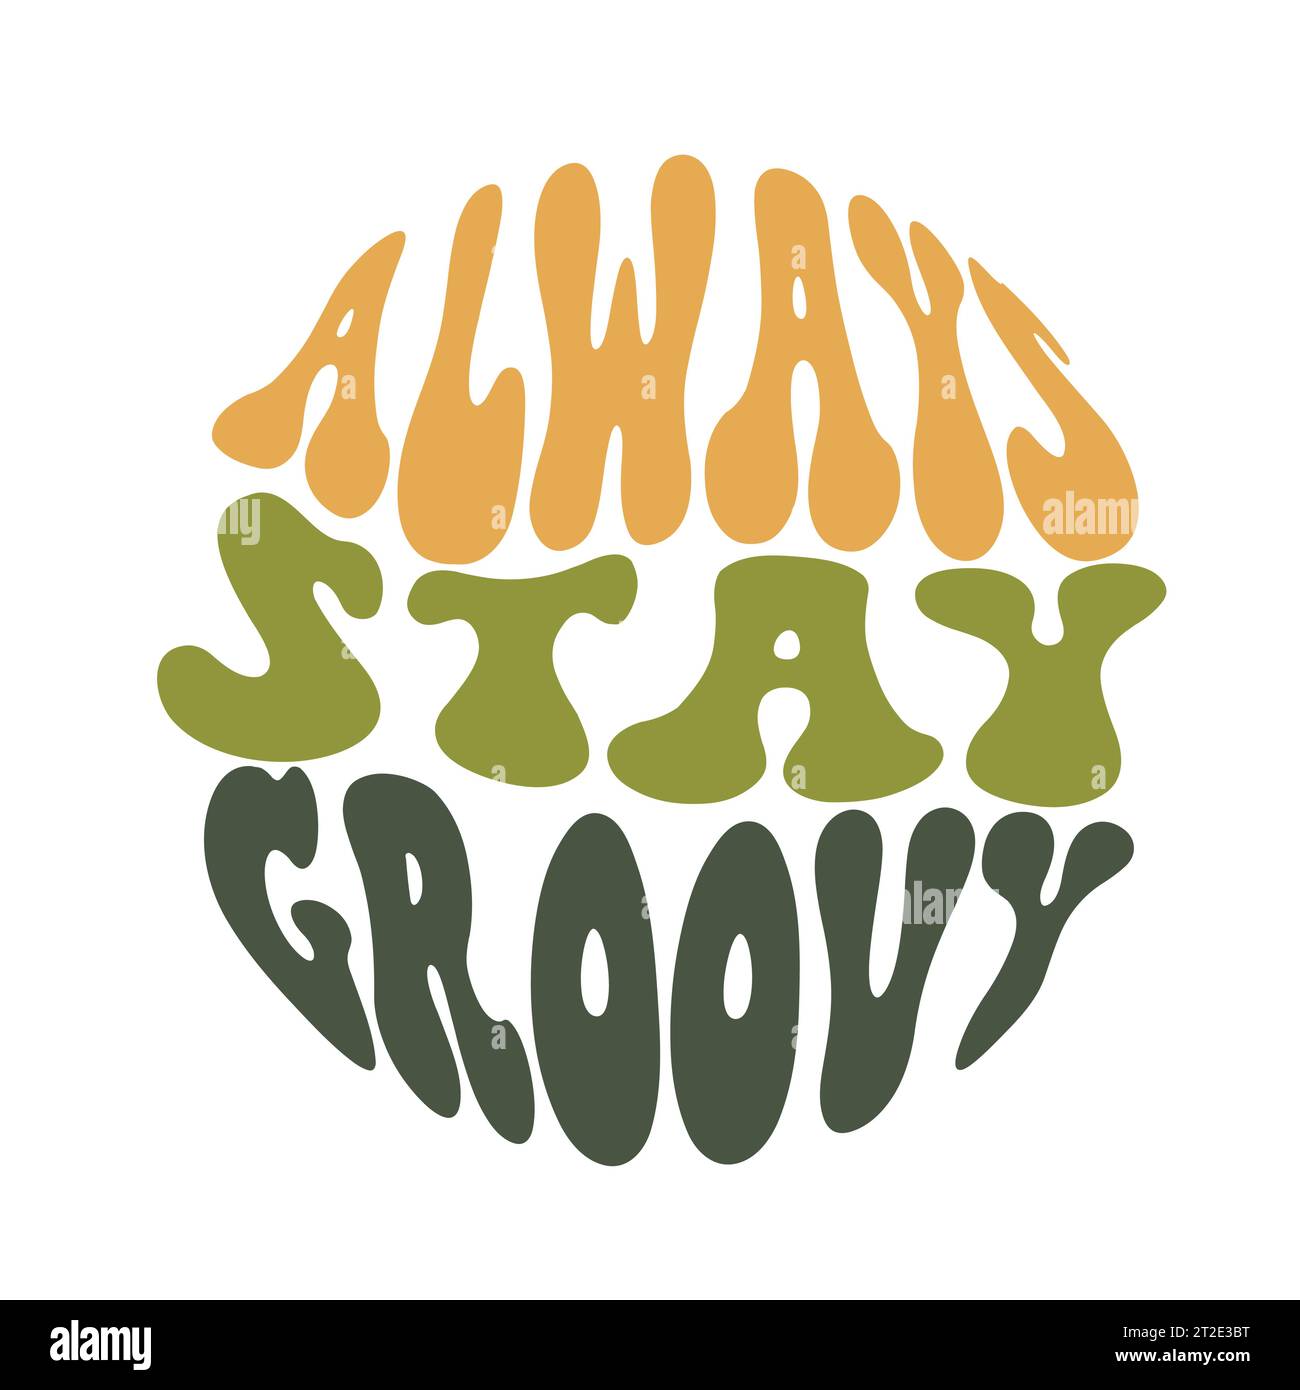 Always Stay Groovy Slogan Print with Hippie Style Flowers Background - 70's Groovy Themed Hand Drawn Abstract Graphic Tee Vector Sticker Stock Vector